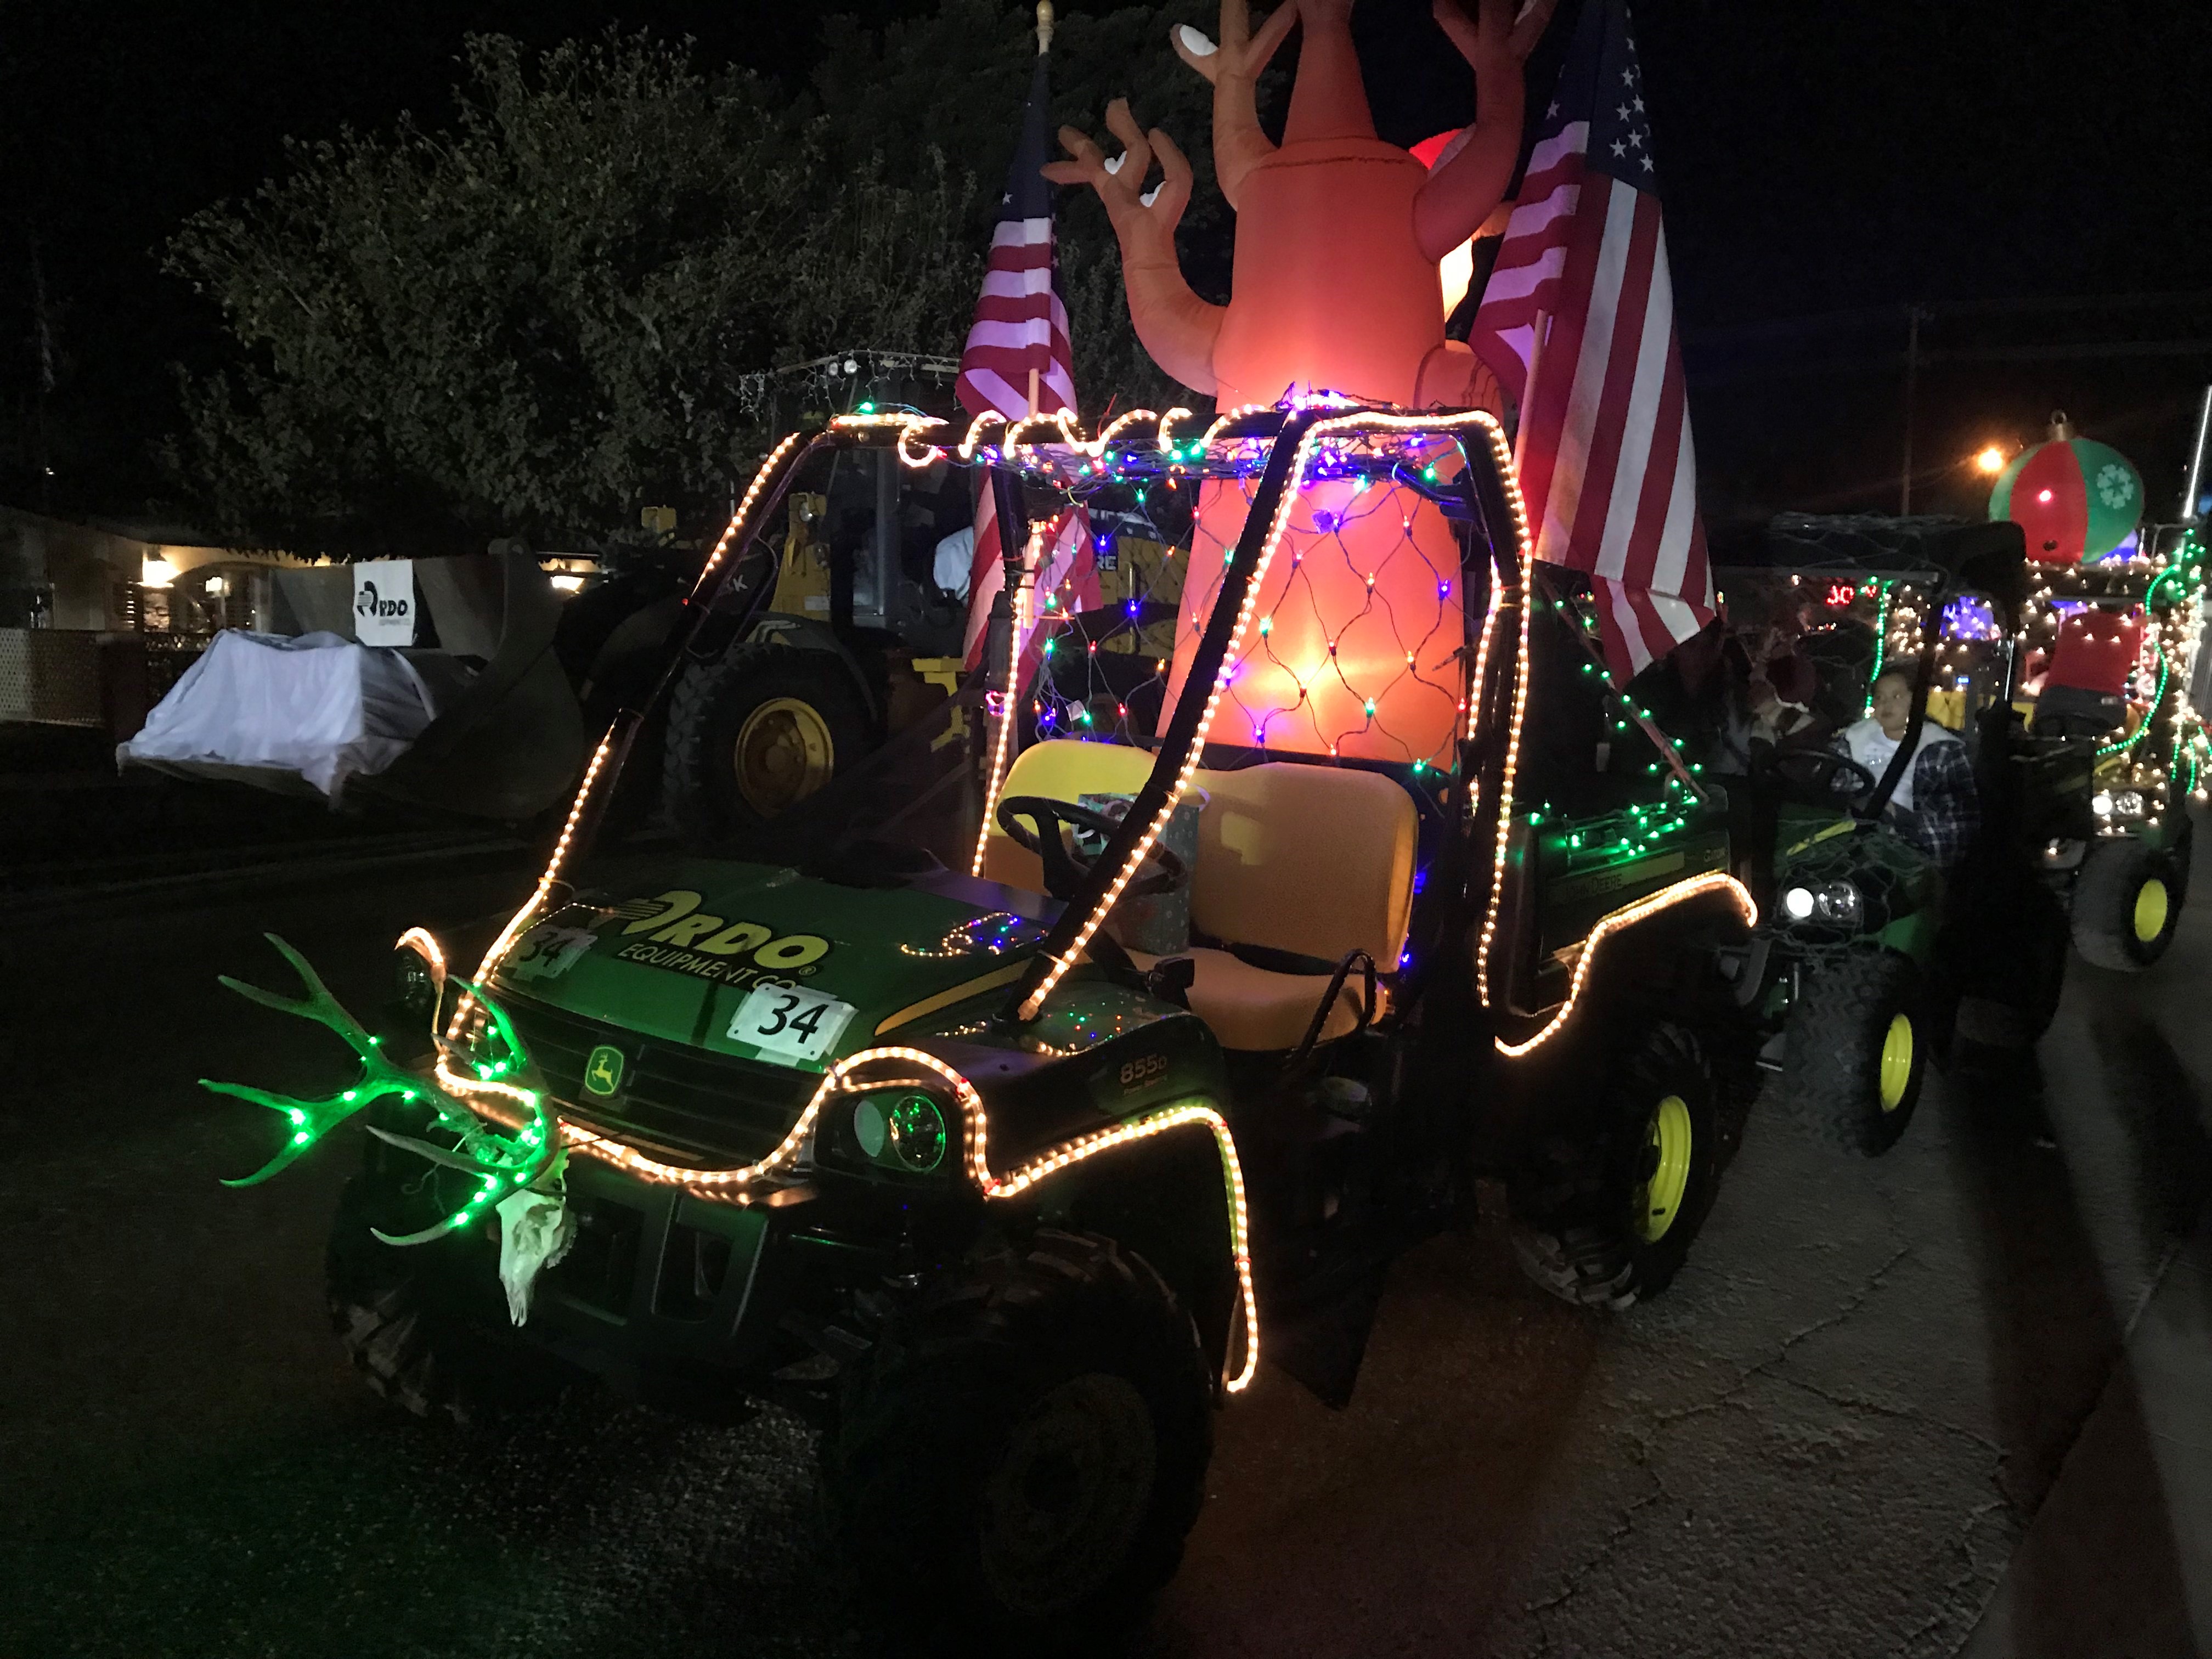 RDO Equipment Co. decorated John Deere XUV at a parade in Indio, CA